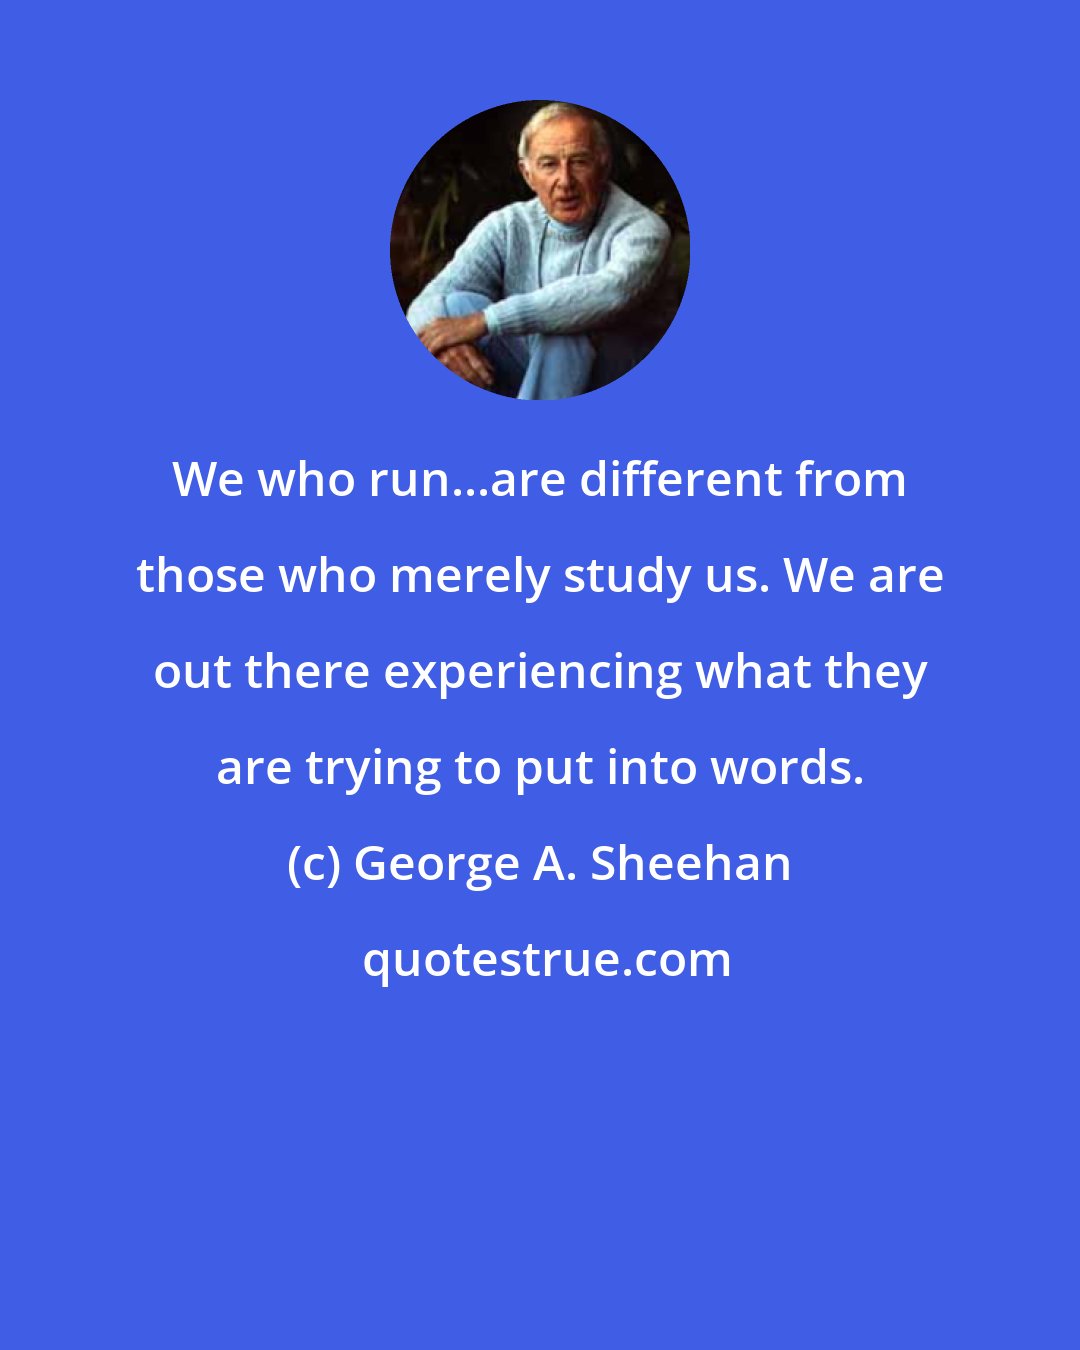 George A. Sheehan: We who run...are different from those who merely study us. We are out there experiencing what they are trying to put into words.